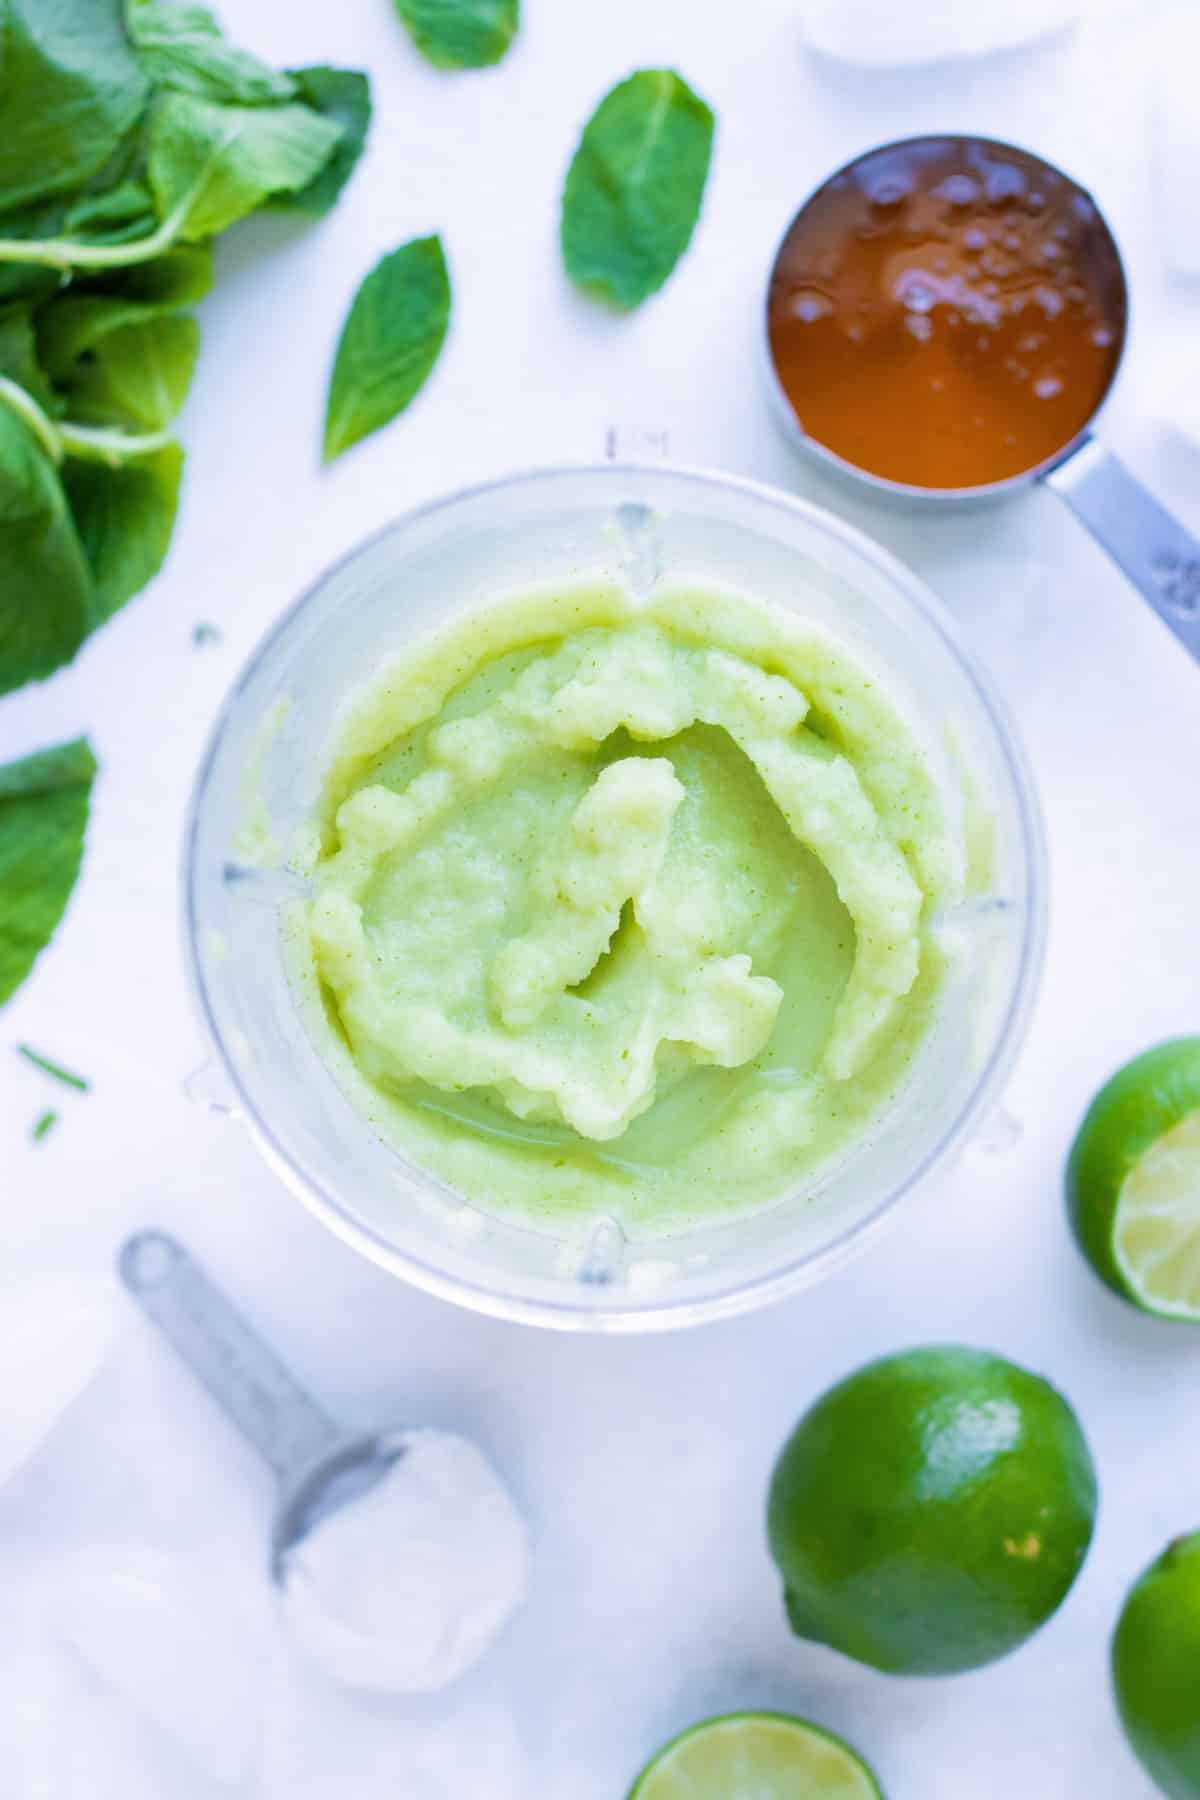 Mojito ingredients are blended together until smooth